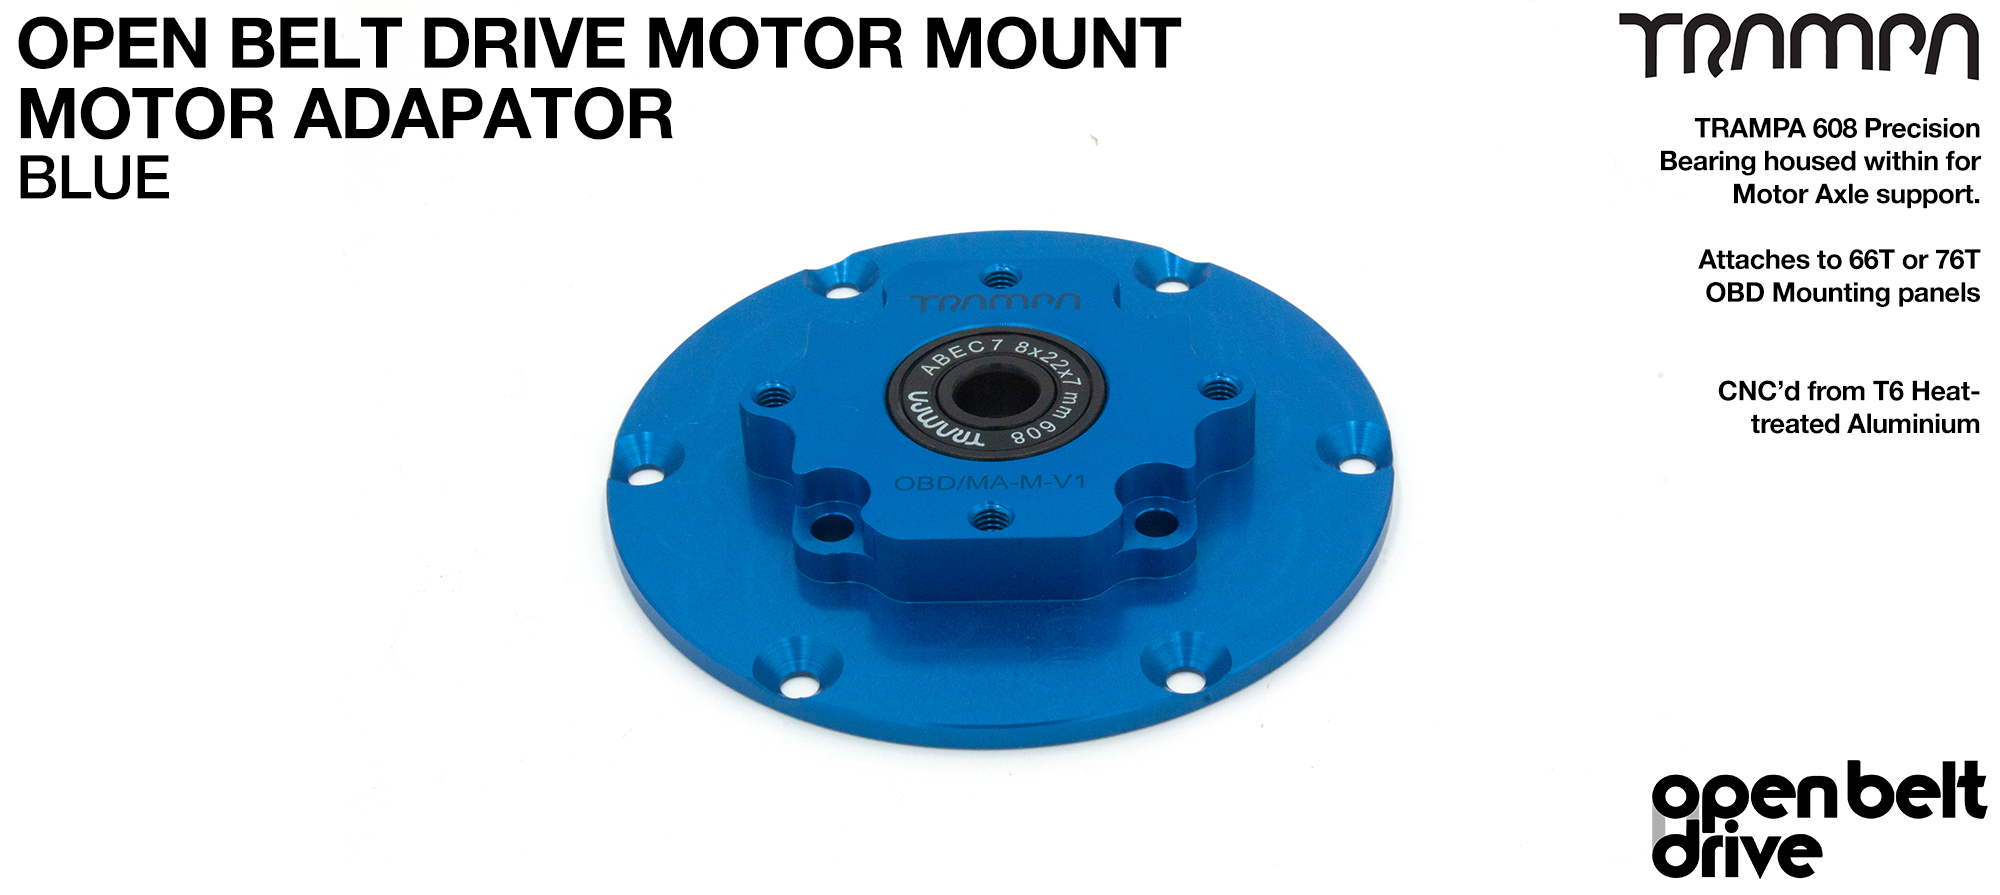 OBD Motor Adaptor with Housed Bearing - BLUE